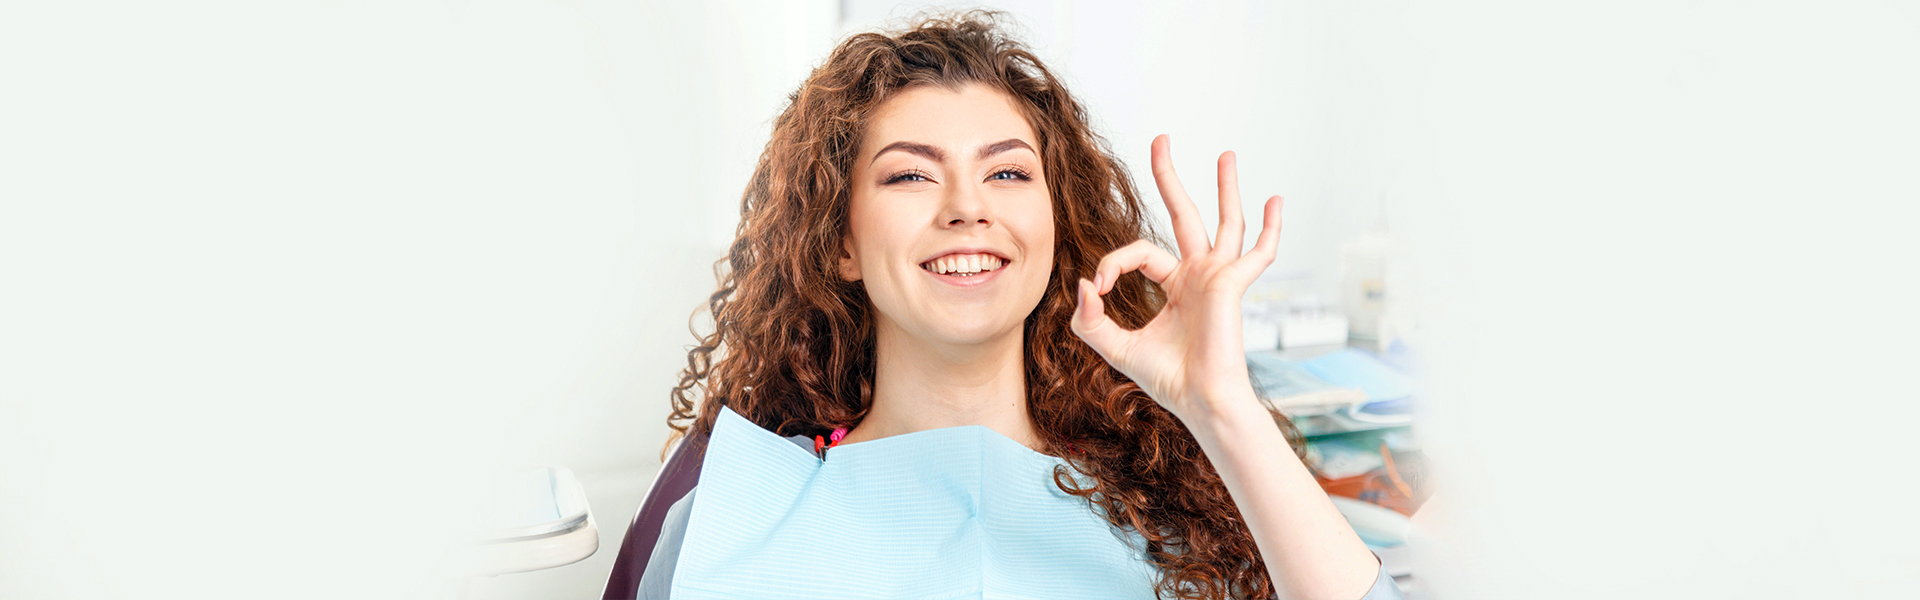 Single Tooth Dental Implants Are Beneficial Over Other Tooth Replacement Options